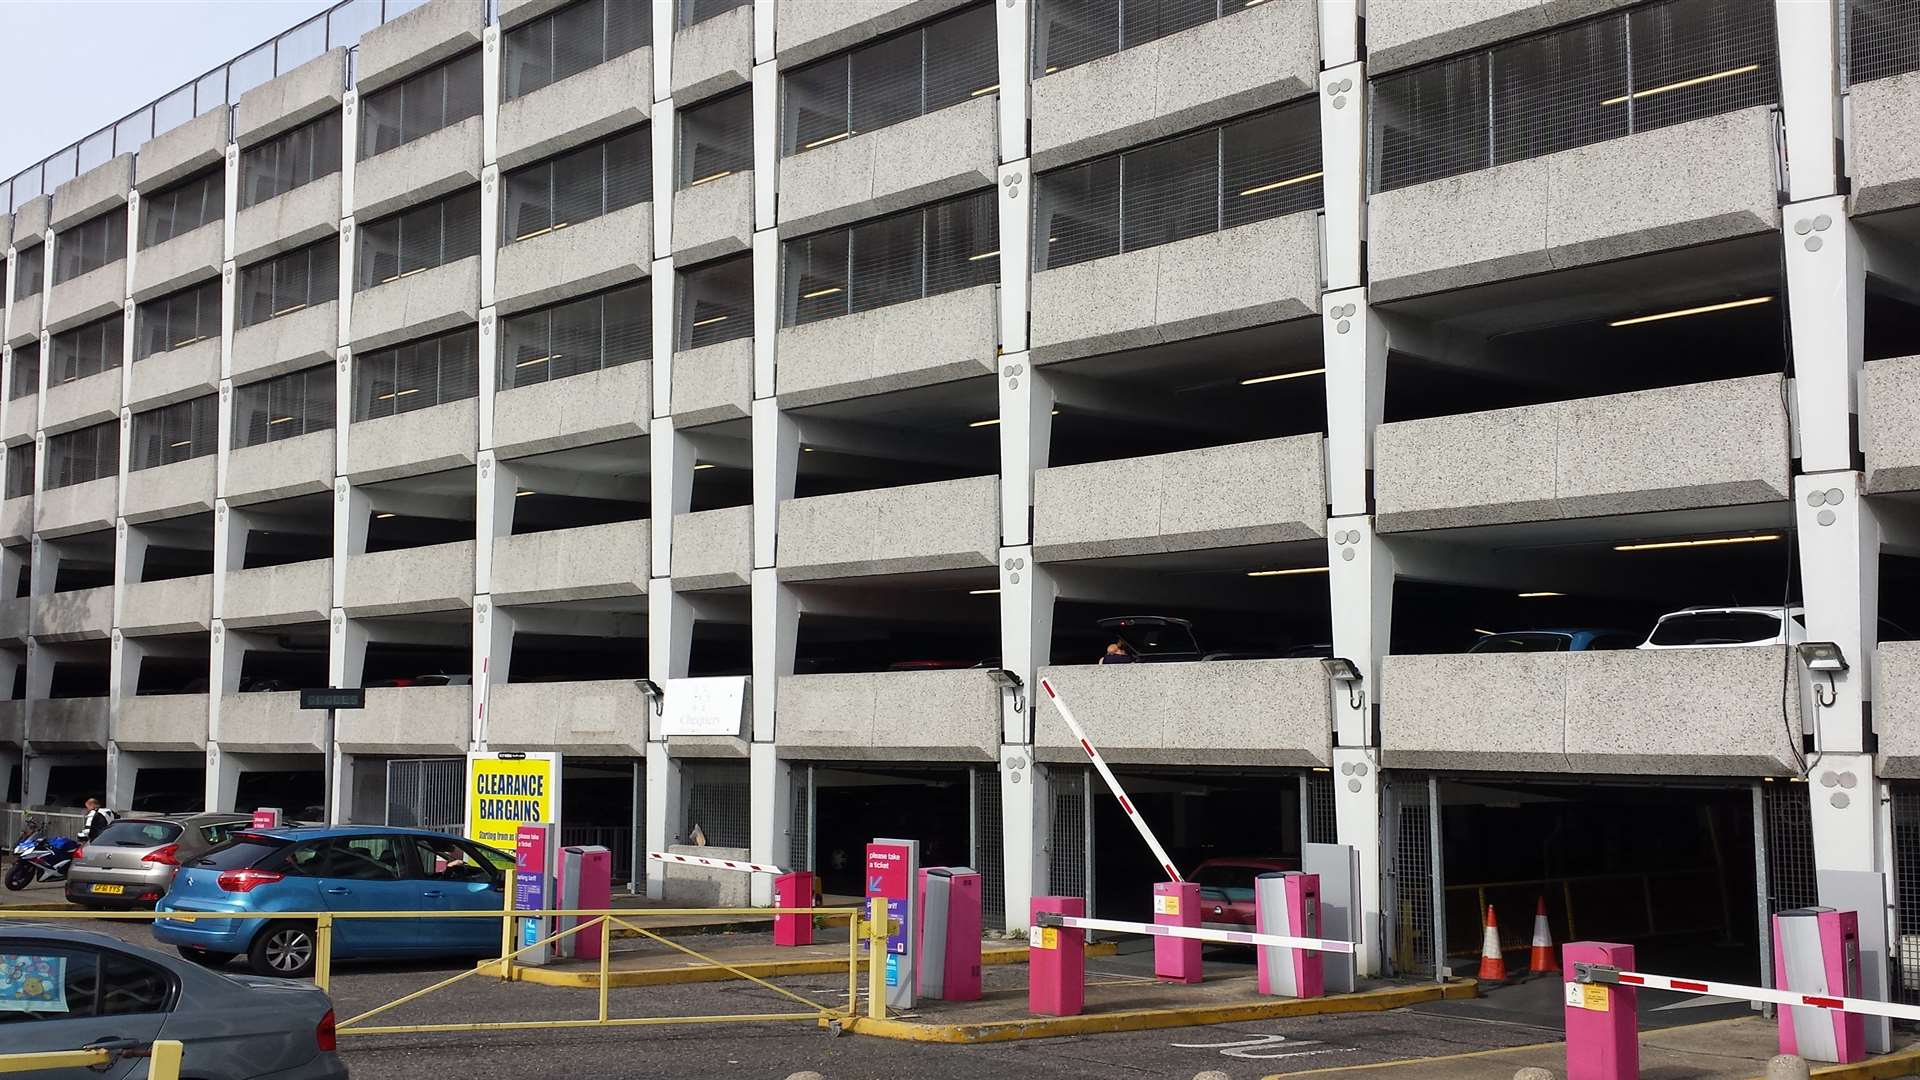 Multi-storey car park at The Mall Chequers in Maidstone